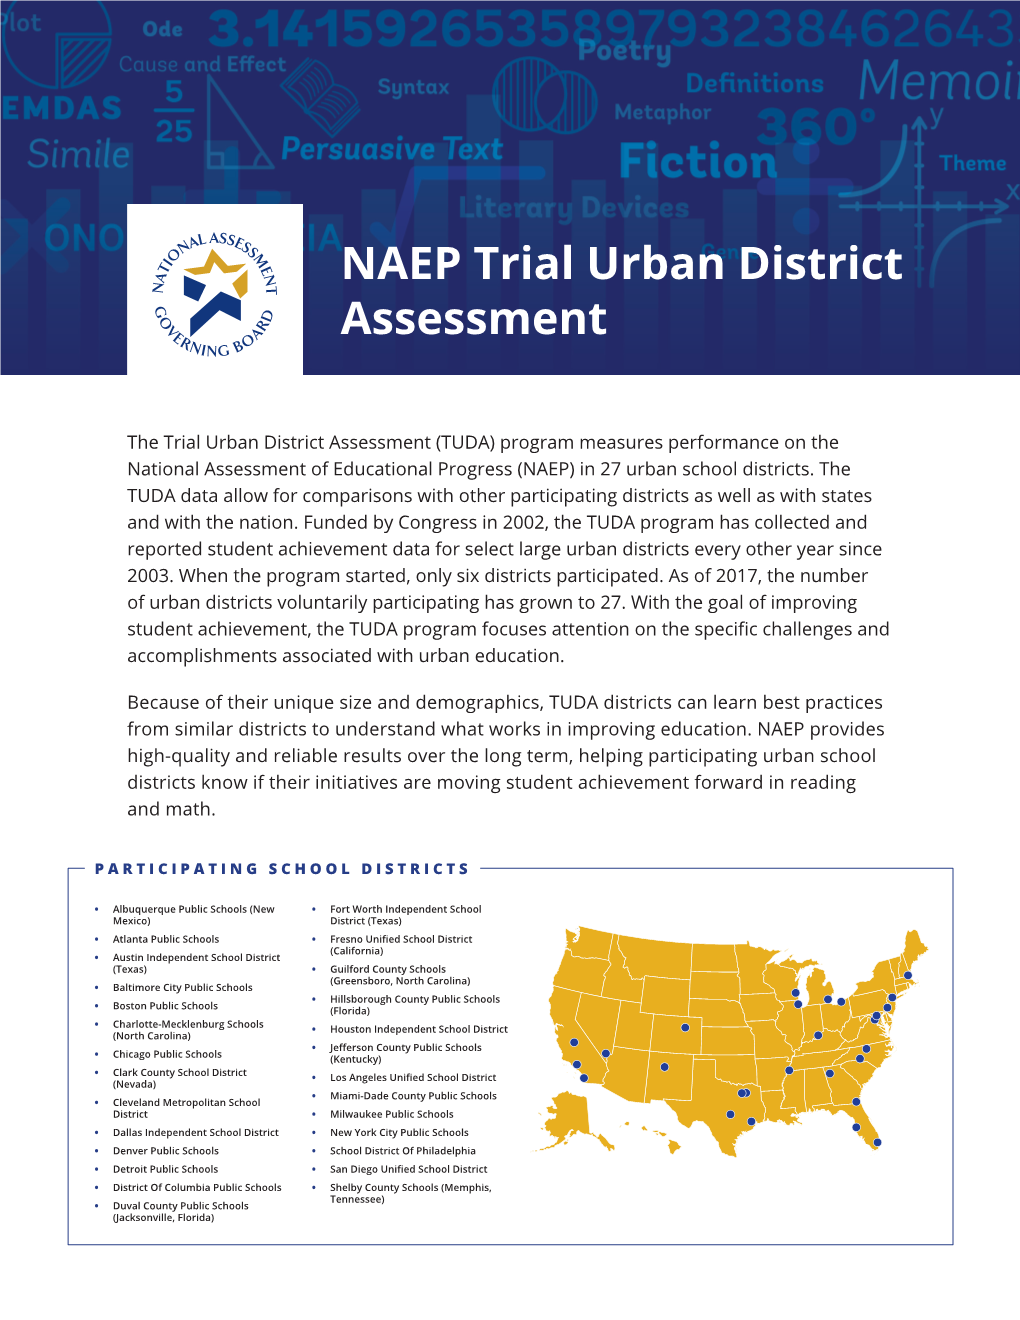 NAEP Trial Urban District Assessment